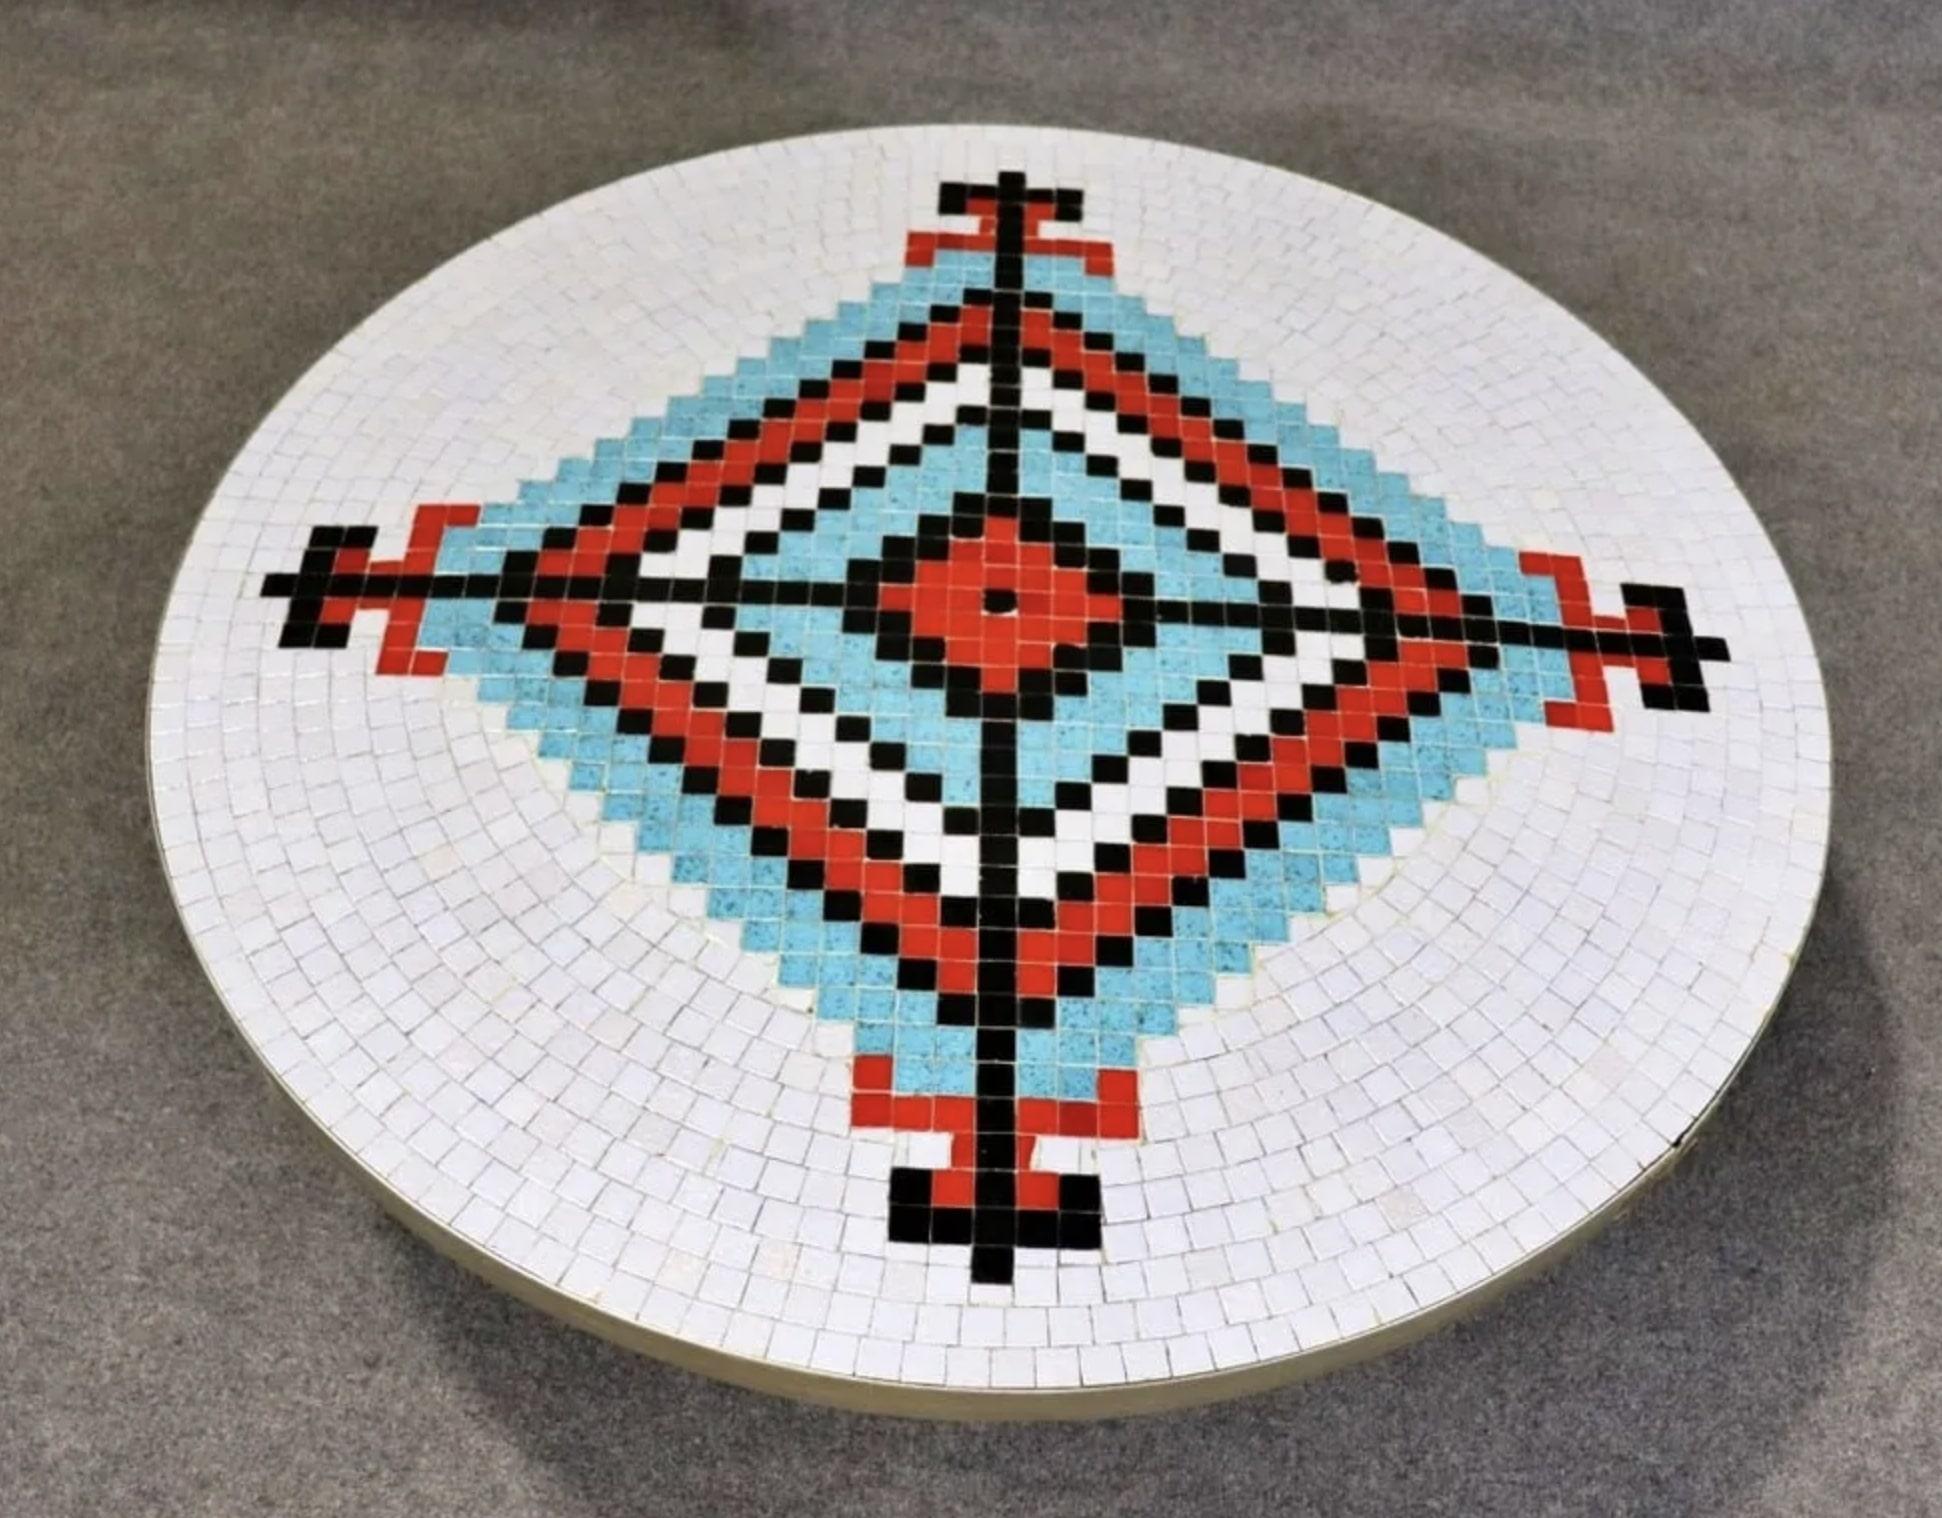 Round coffee table with tile design in American Indian motif. Tapered wood legs and brass trim.
Please confirm location NY or NJ